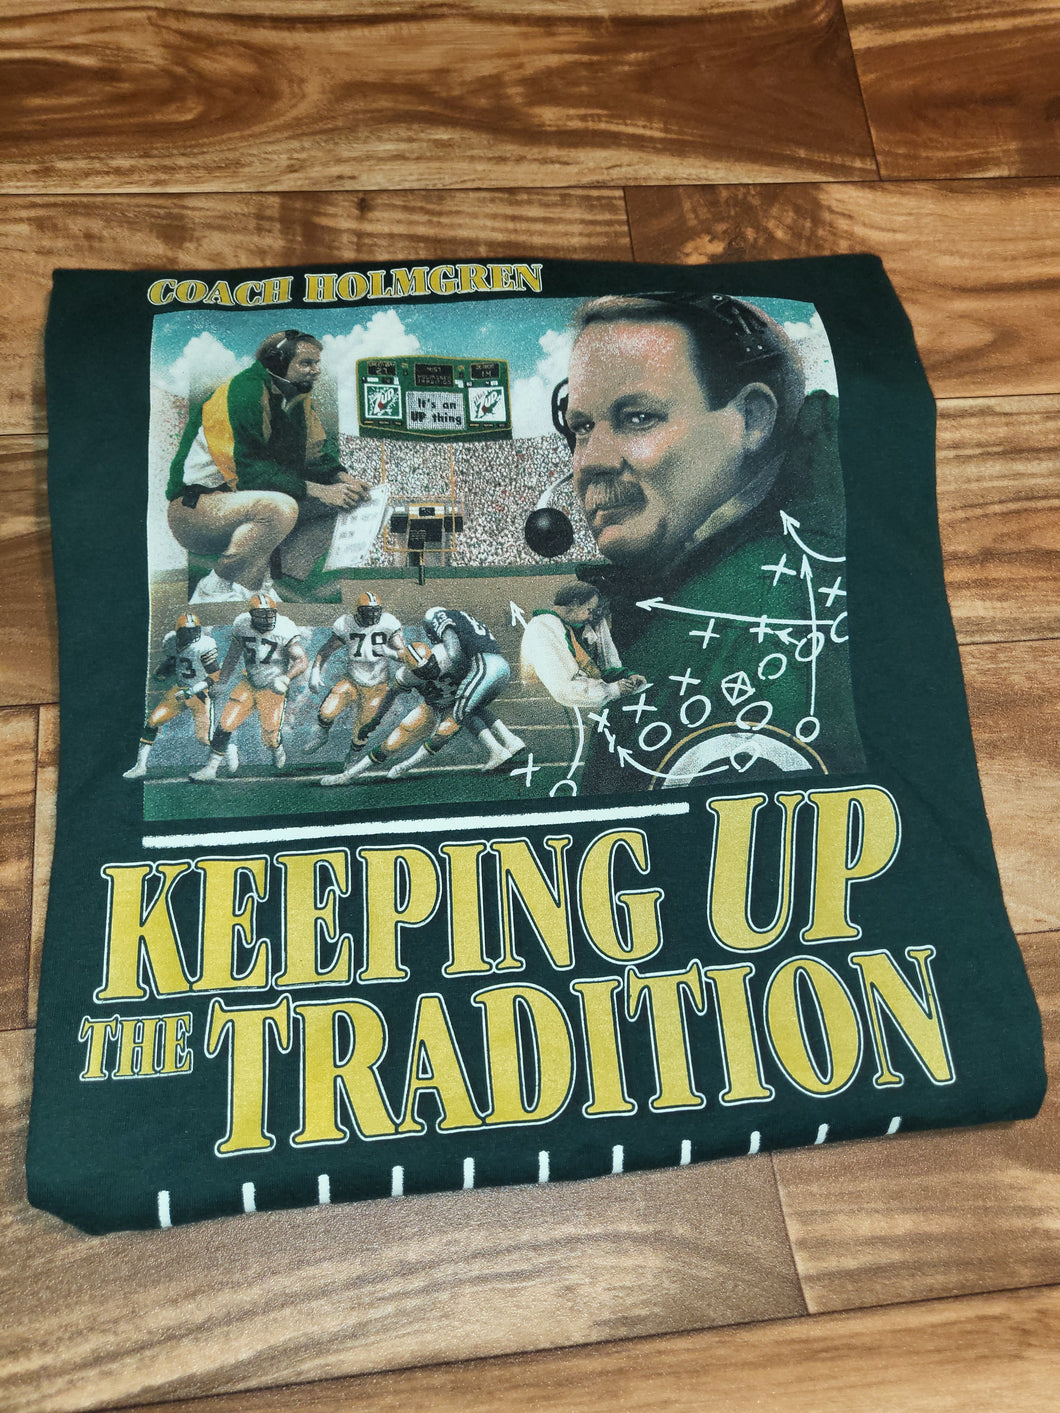 XL - Vintage Green Bay Packers 1990s Mike Holmgren Coach 7up Promo Shirt